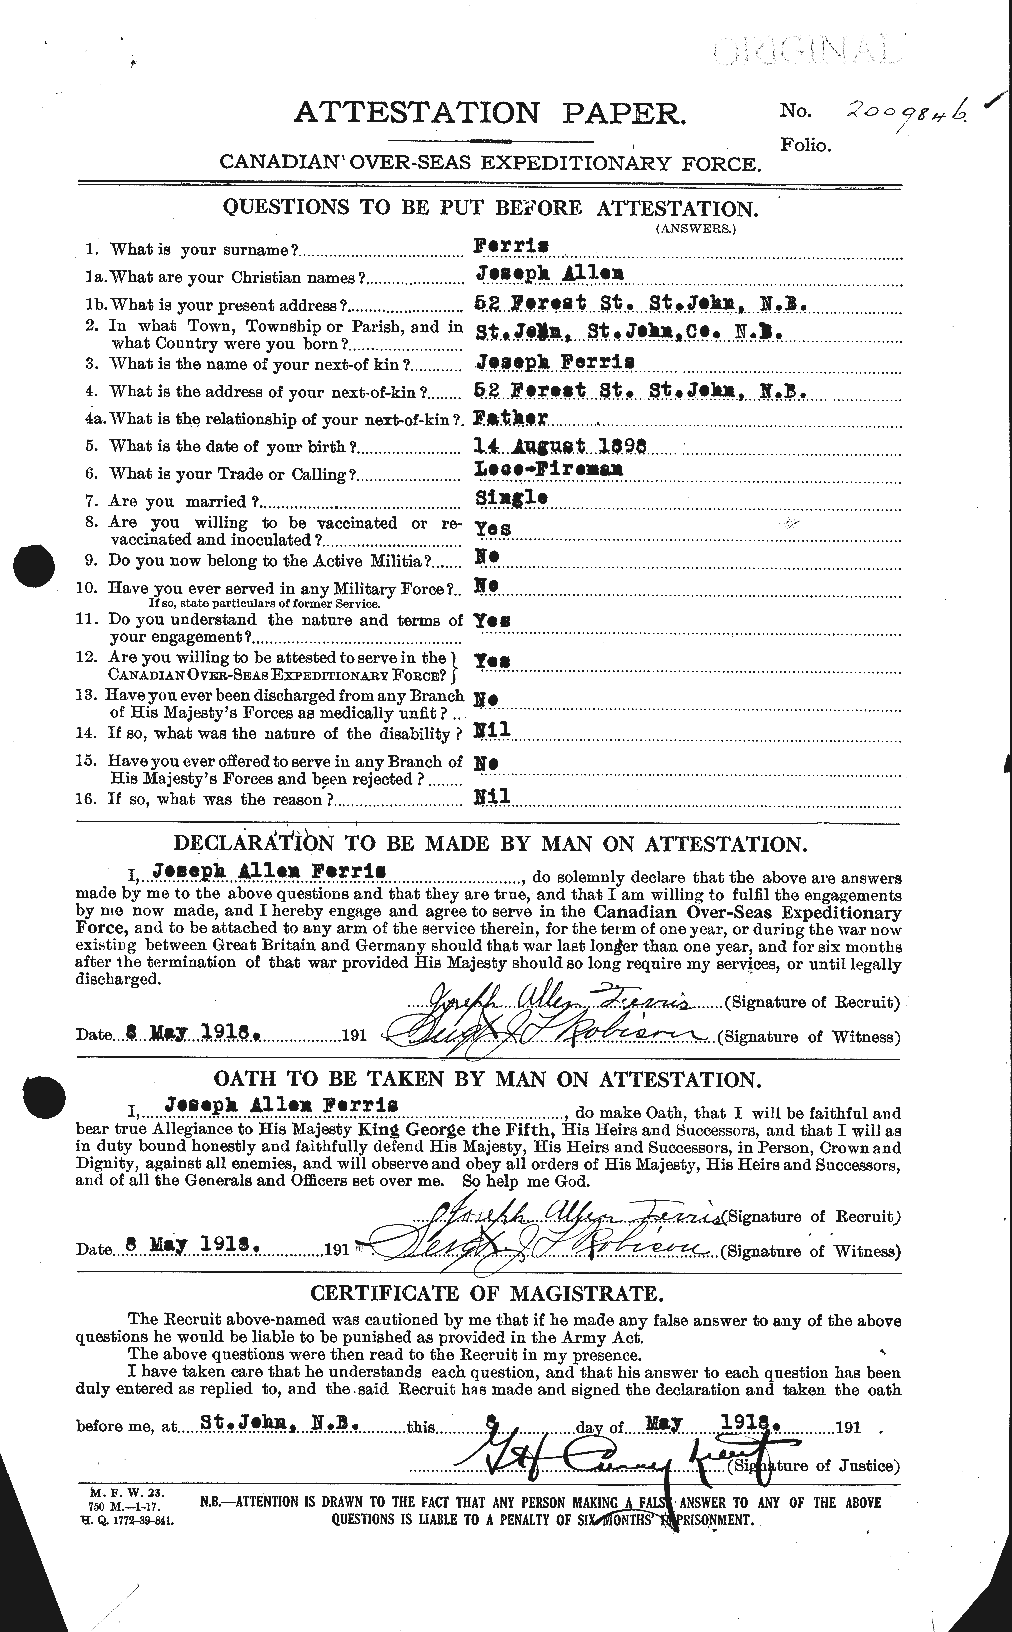 Personnel Records of the First World War - CEF 325221a